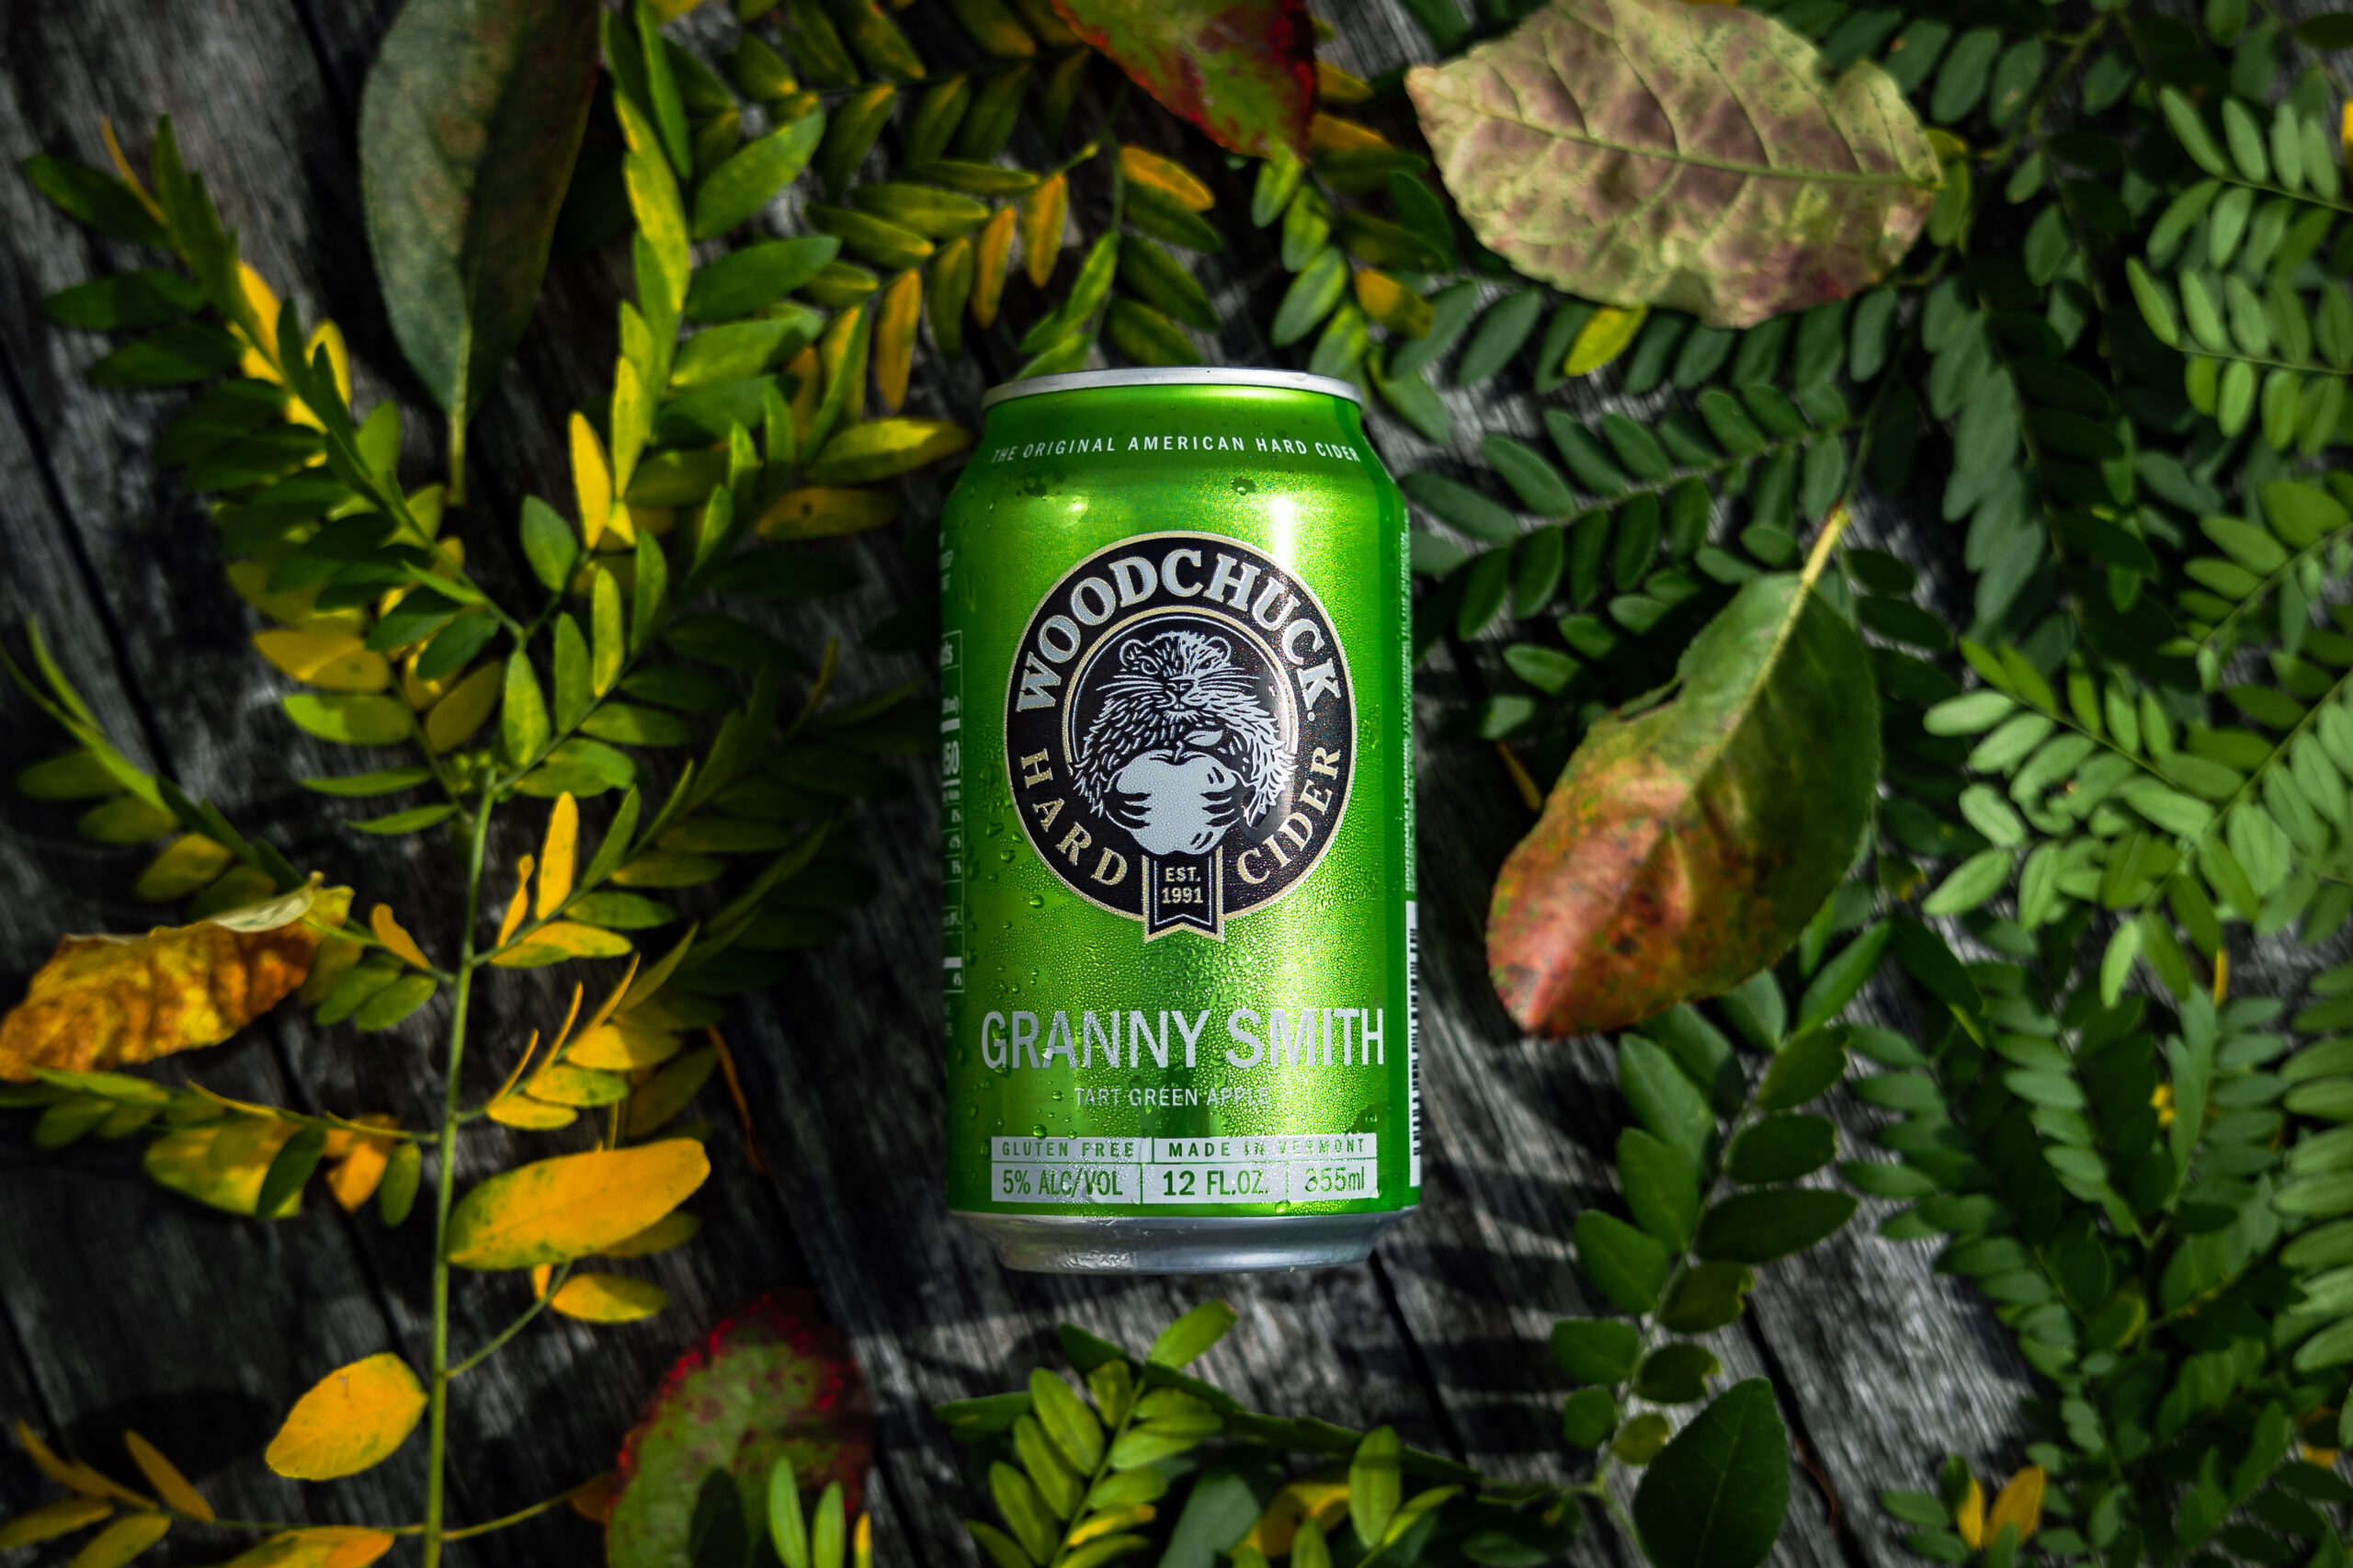 Woodchuck Granny Smith Hard Cider - Tart green apple 12 oz can on top of leaves and greenery